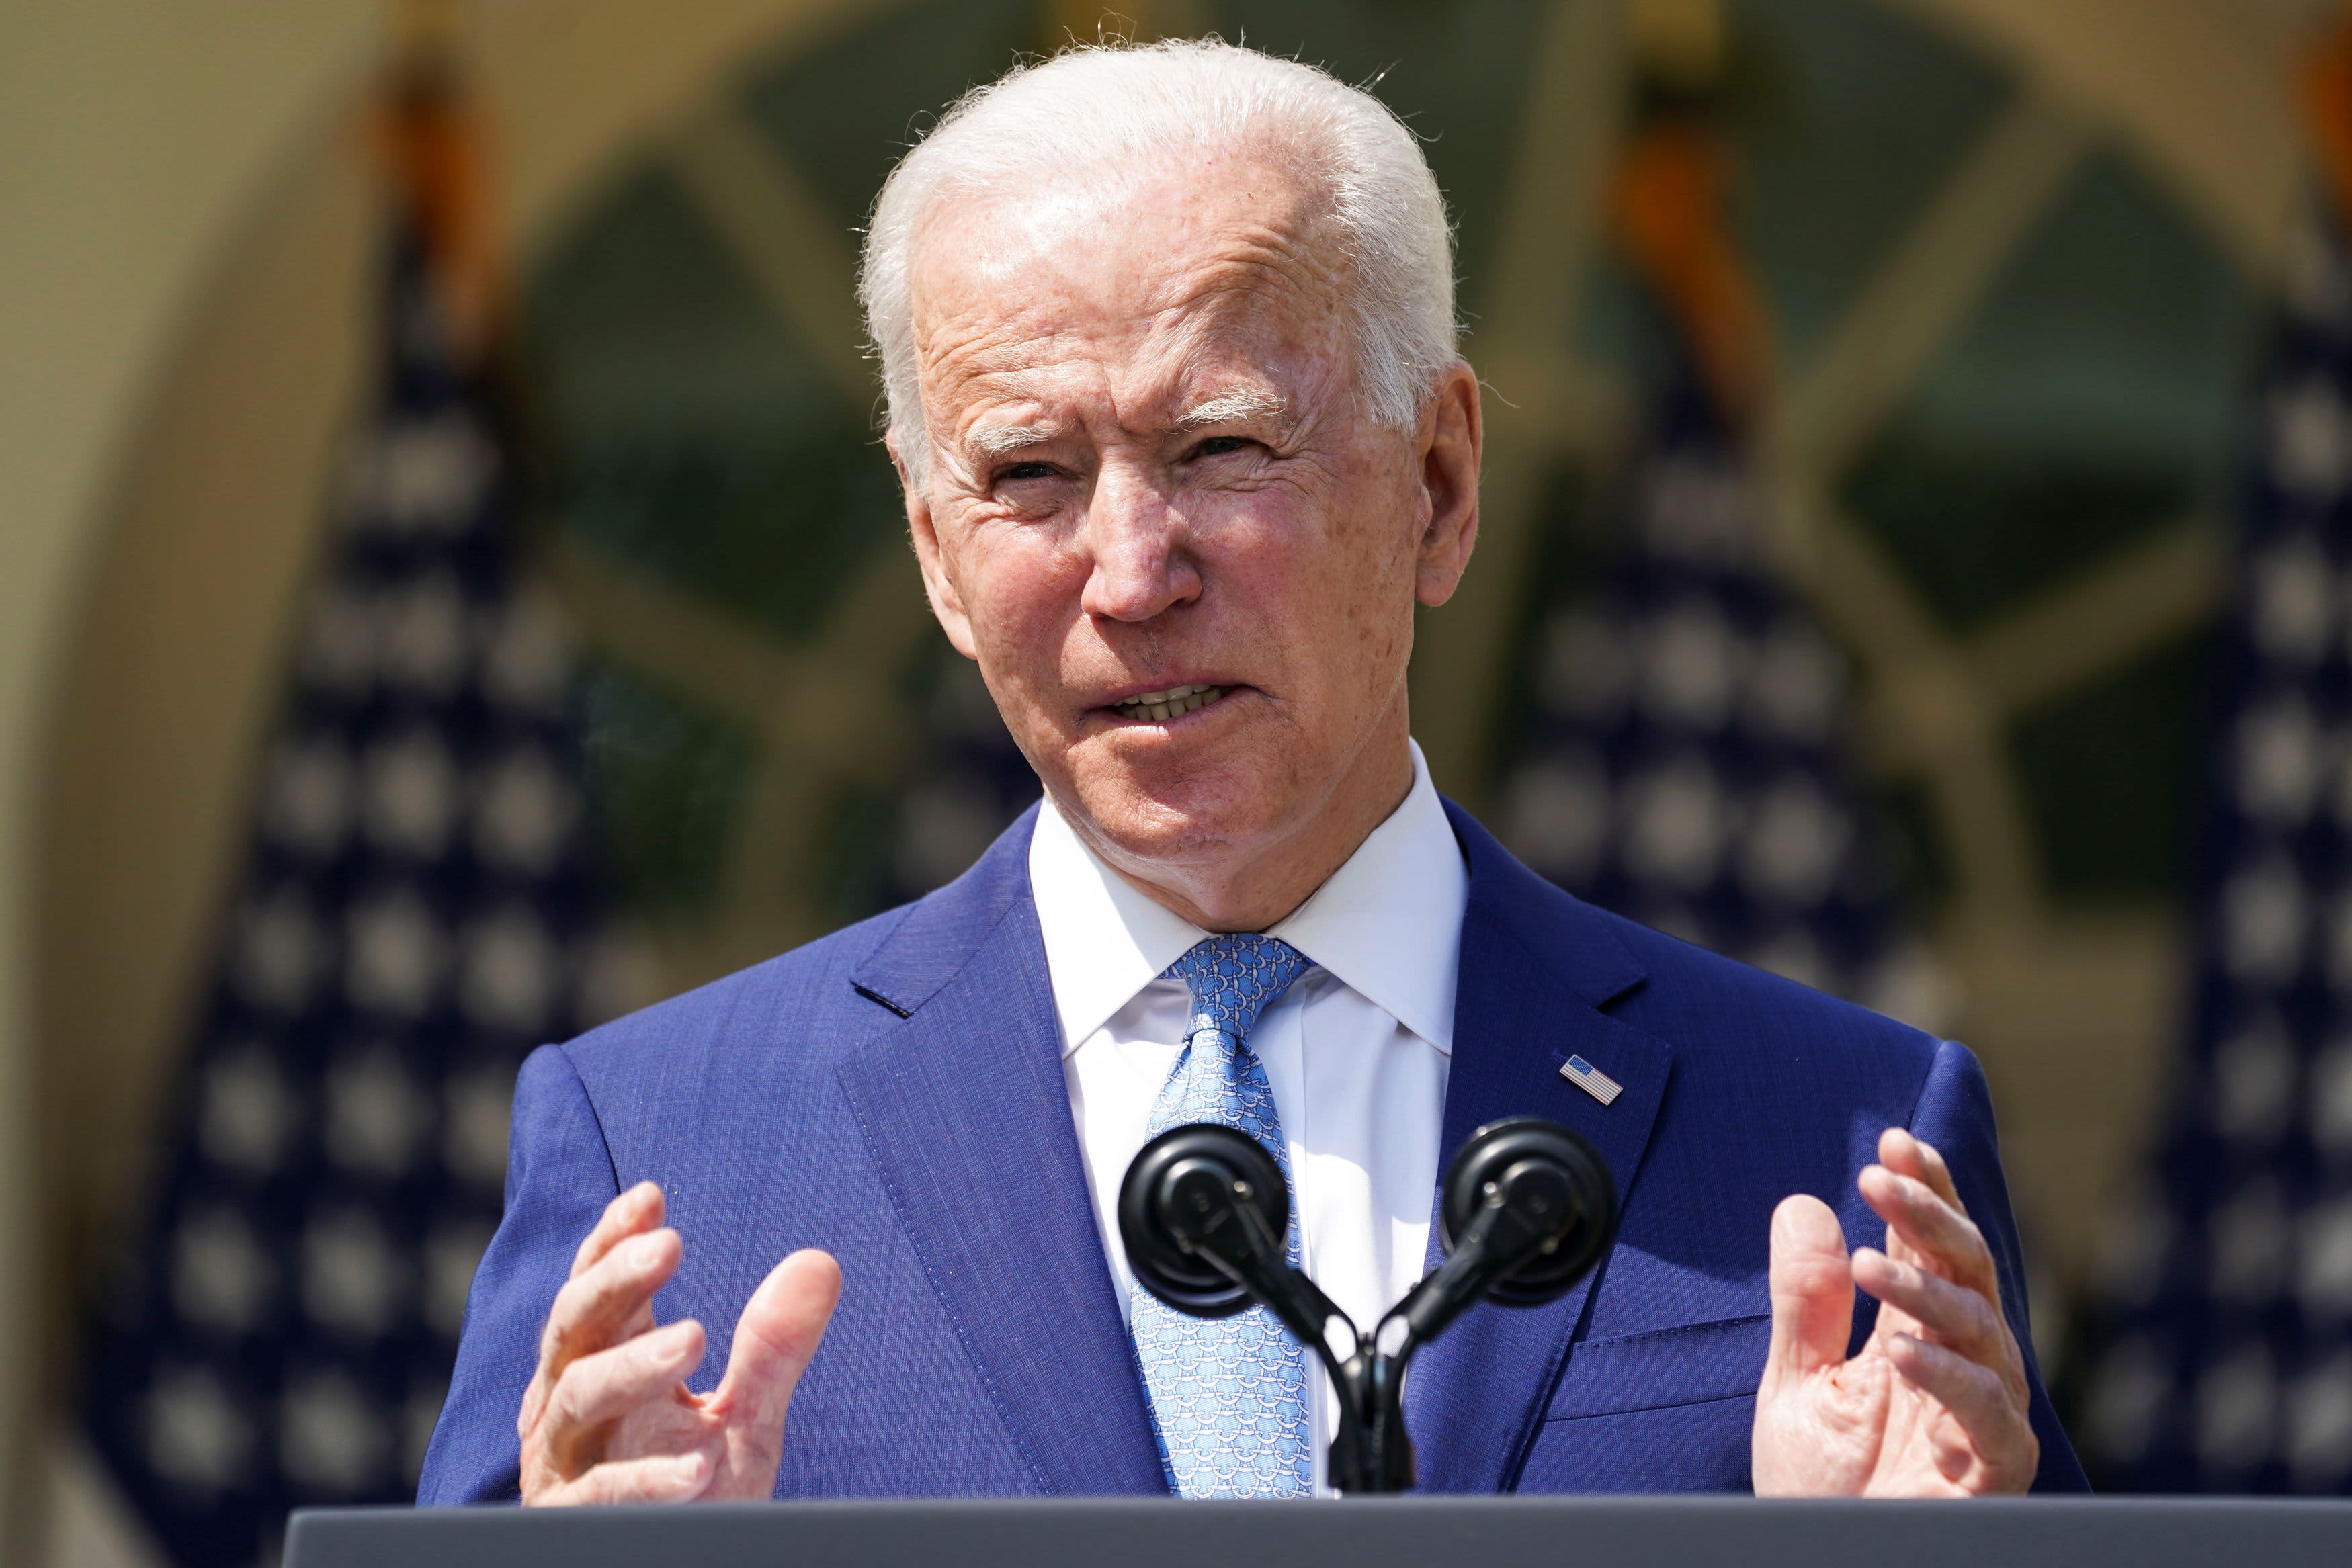 Biden says gun violence in U.S. is an epidemic, unveils executive actions and calls for national red flag law